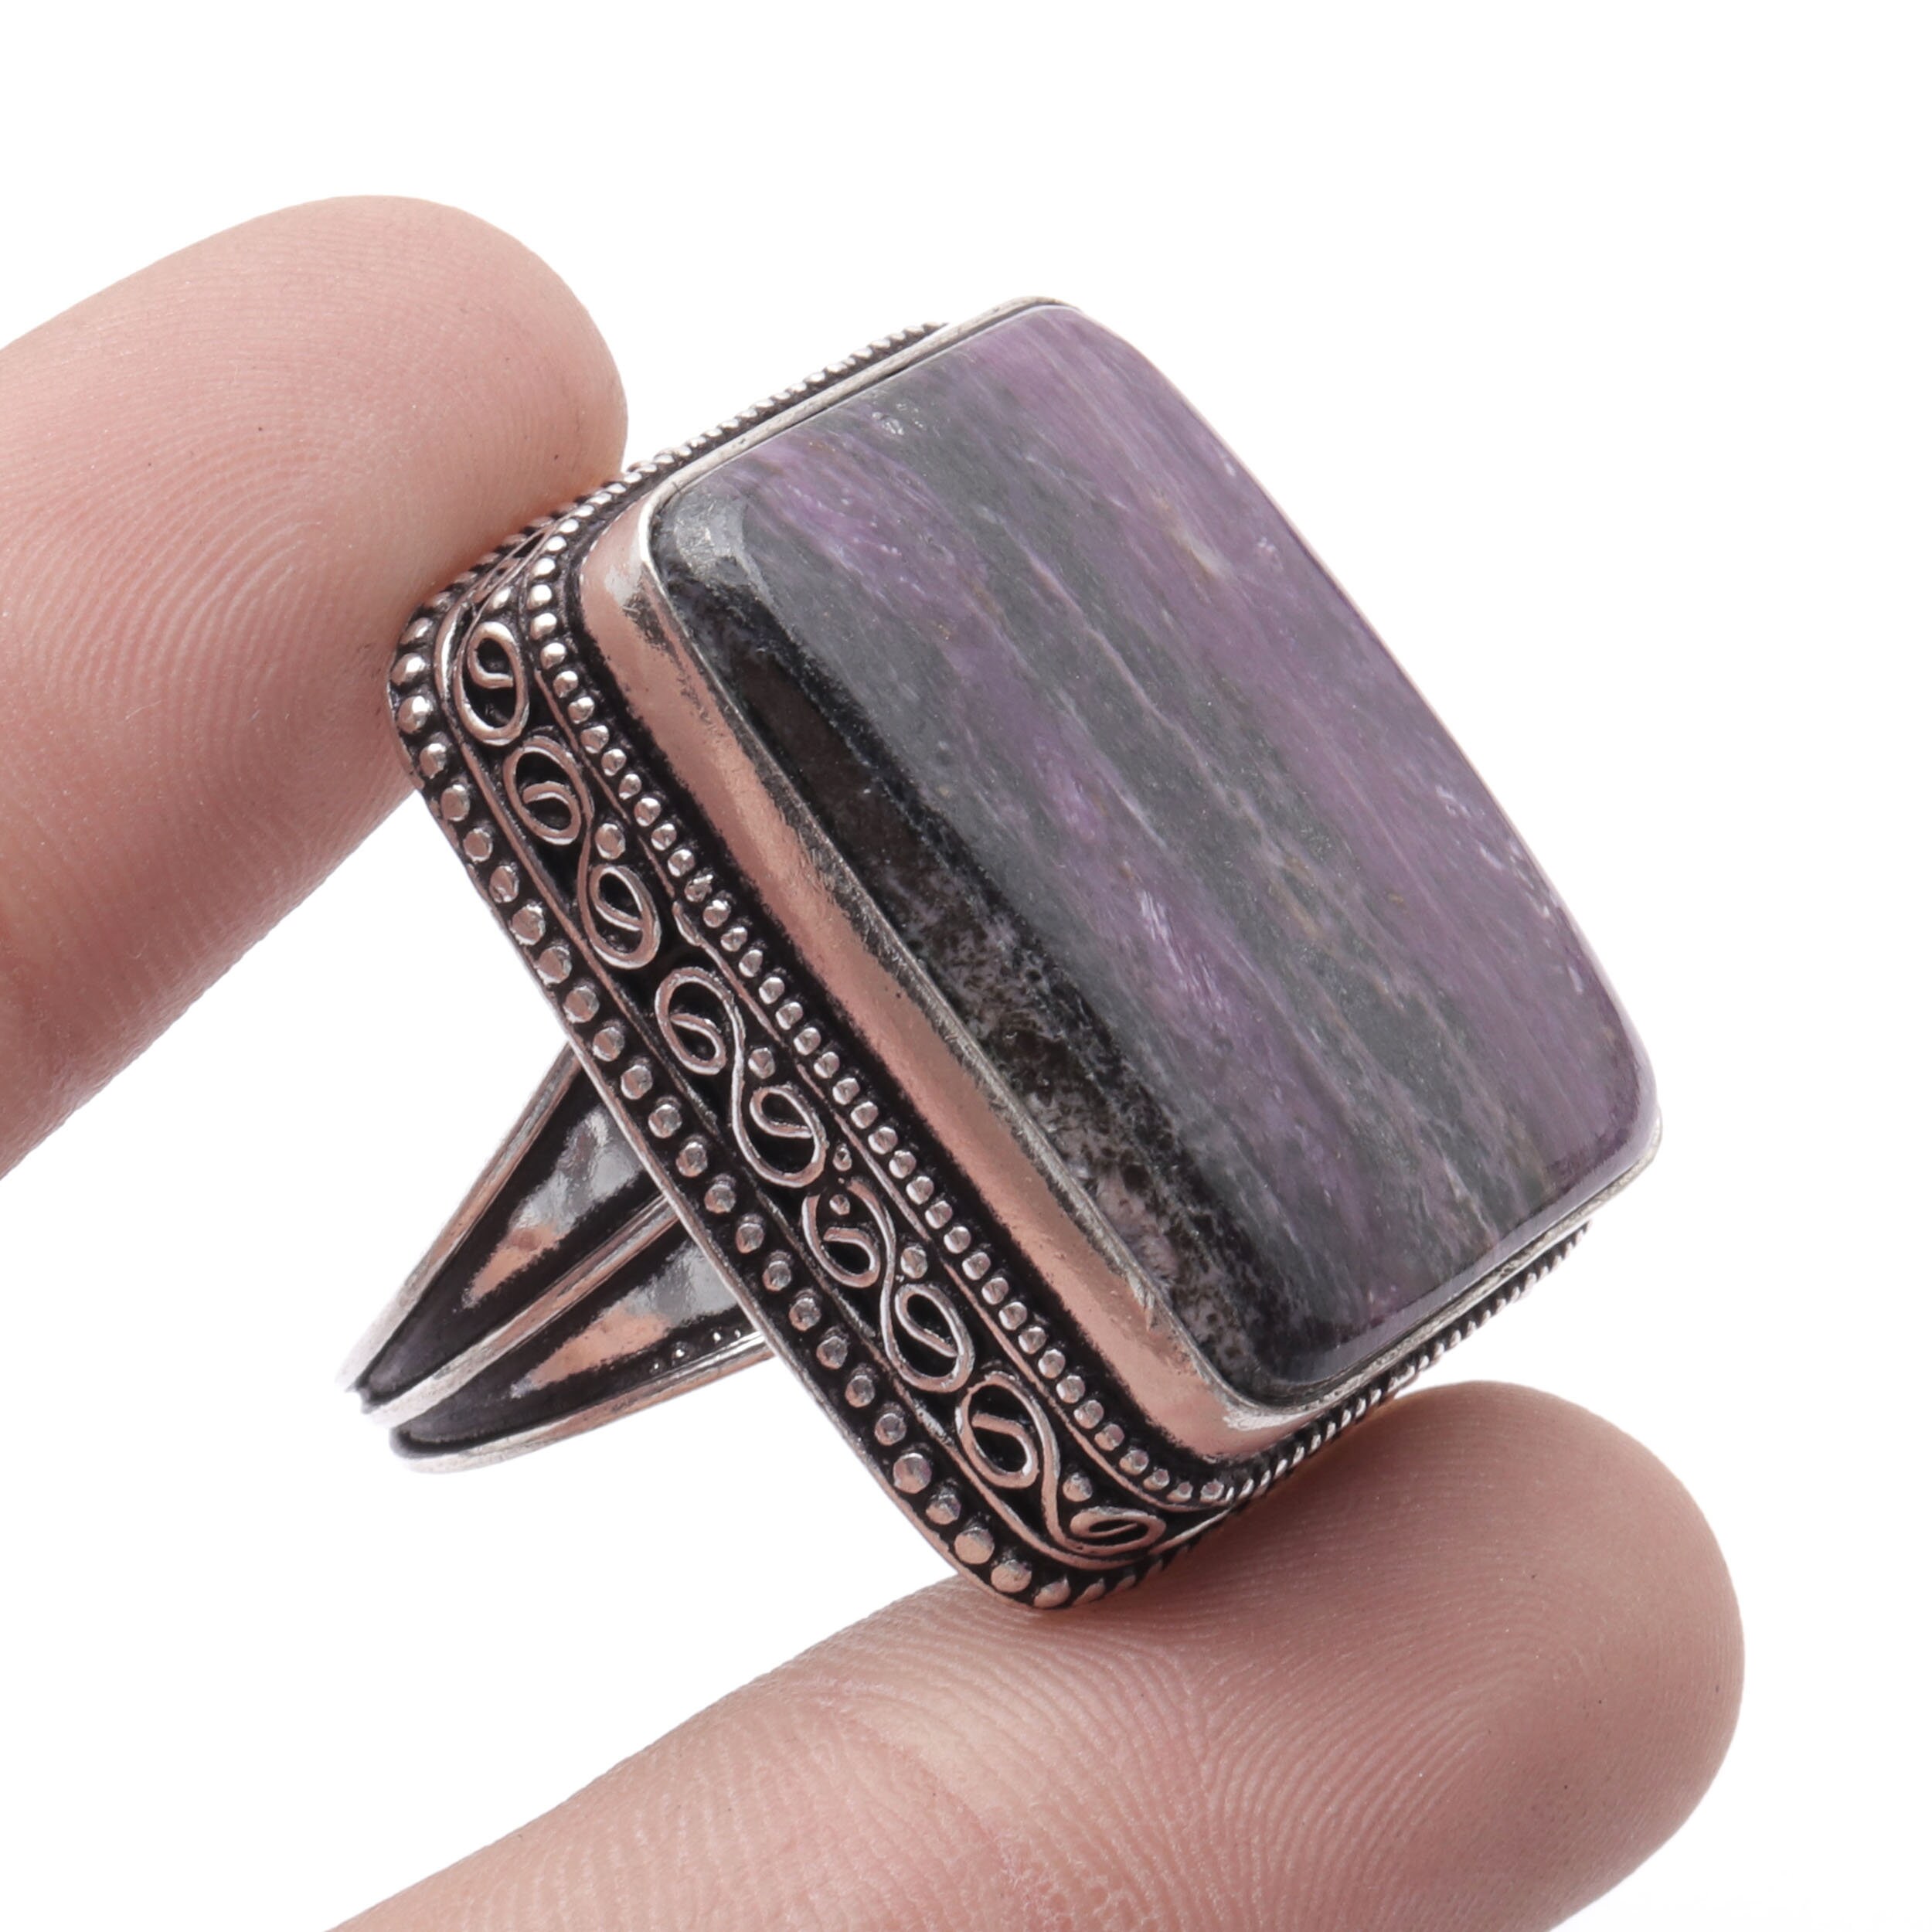 Natural Copper Charoite Gemstone Ring Solid 925 Sterling Silver Jewelry Size 5.5 